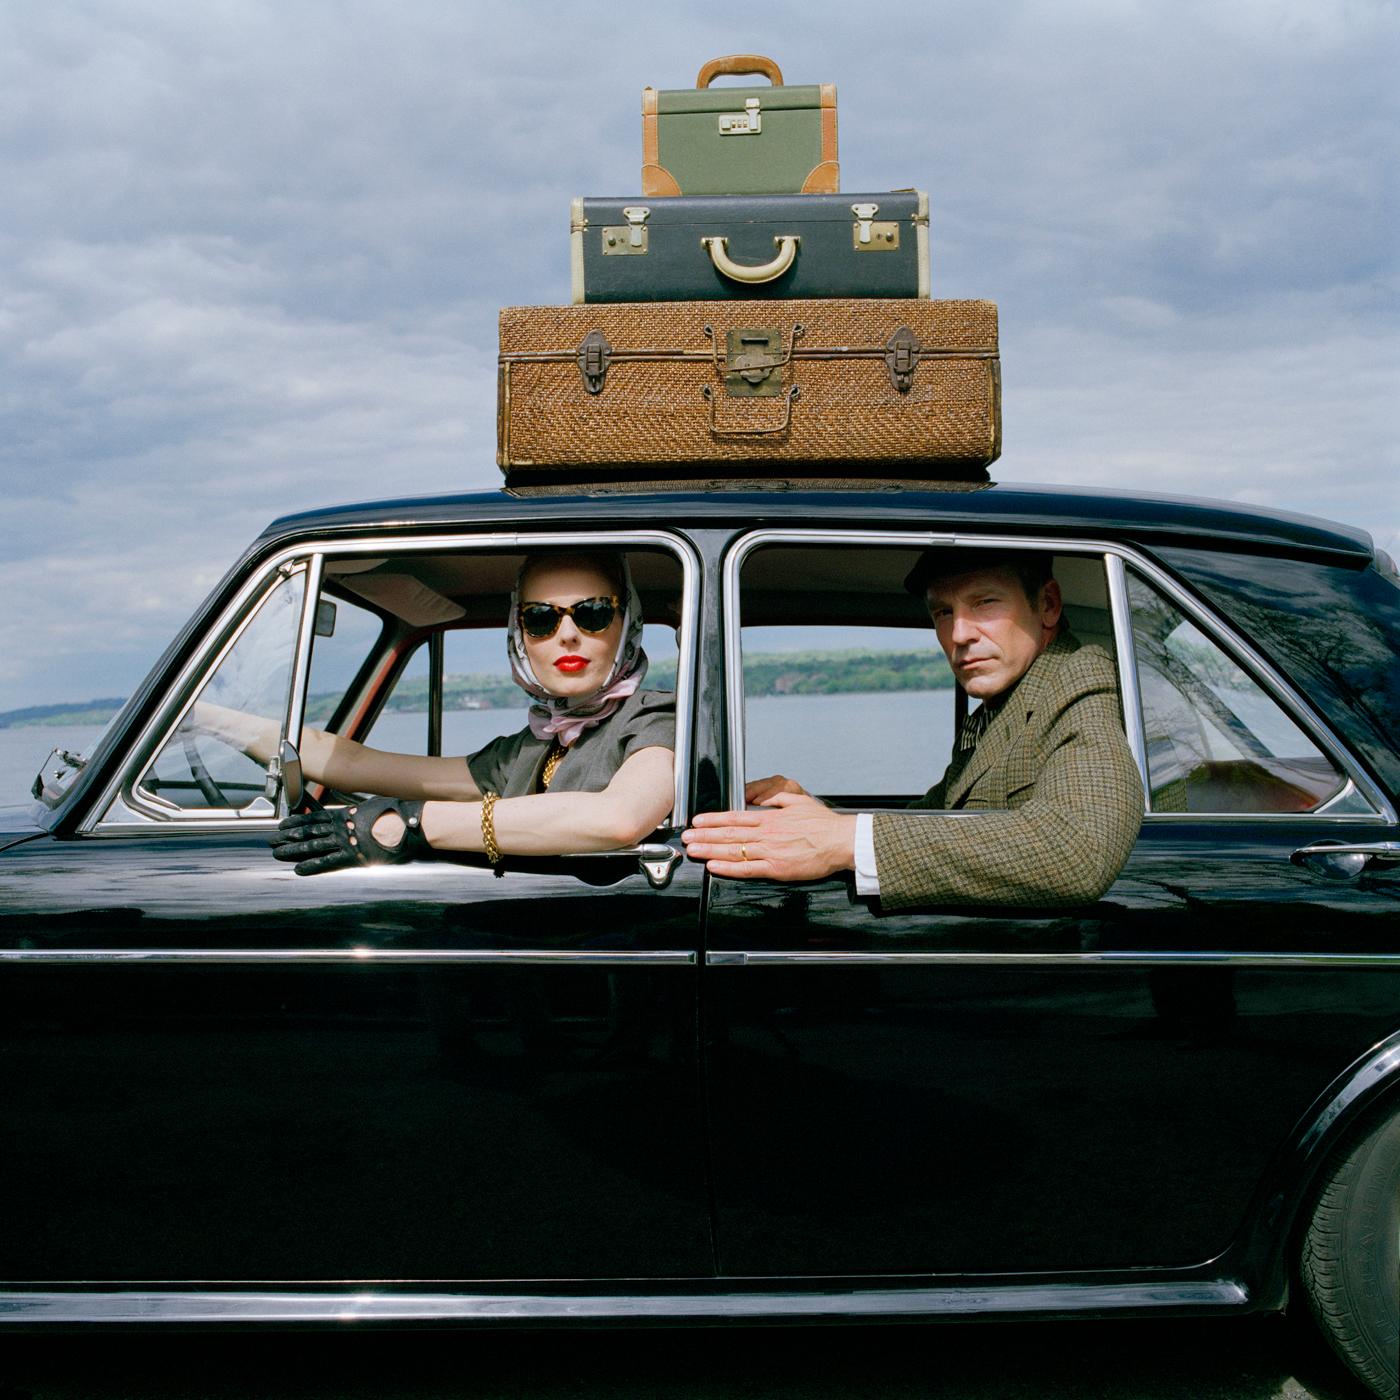 Rodney Smith Color Photograph - Viktoria and Rainer in Car, Snedens Landing, NY - 40 x 40 inches